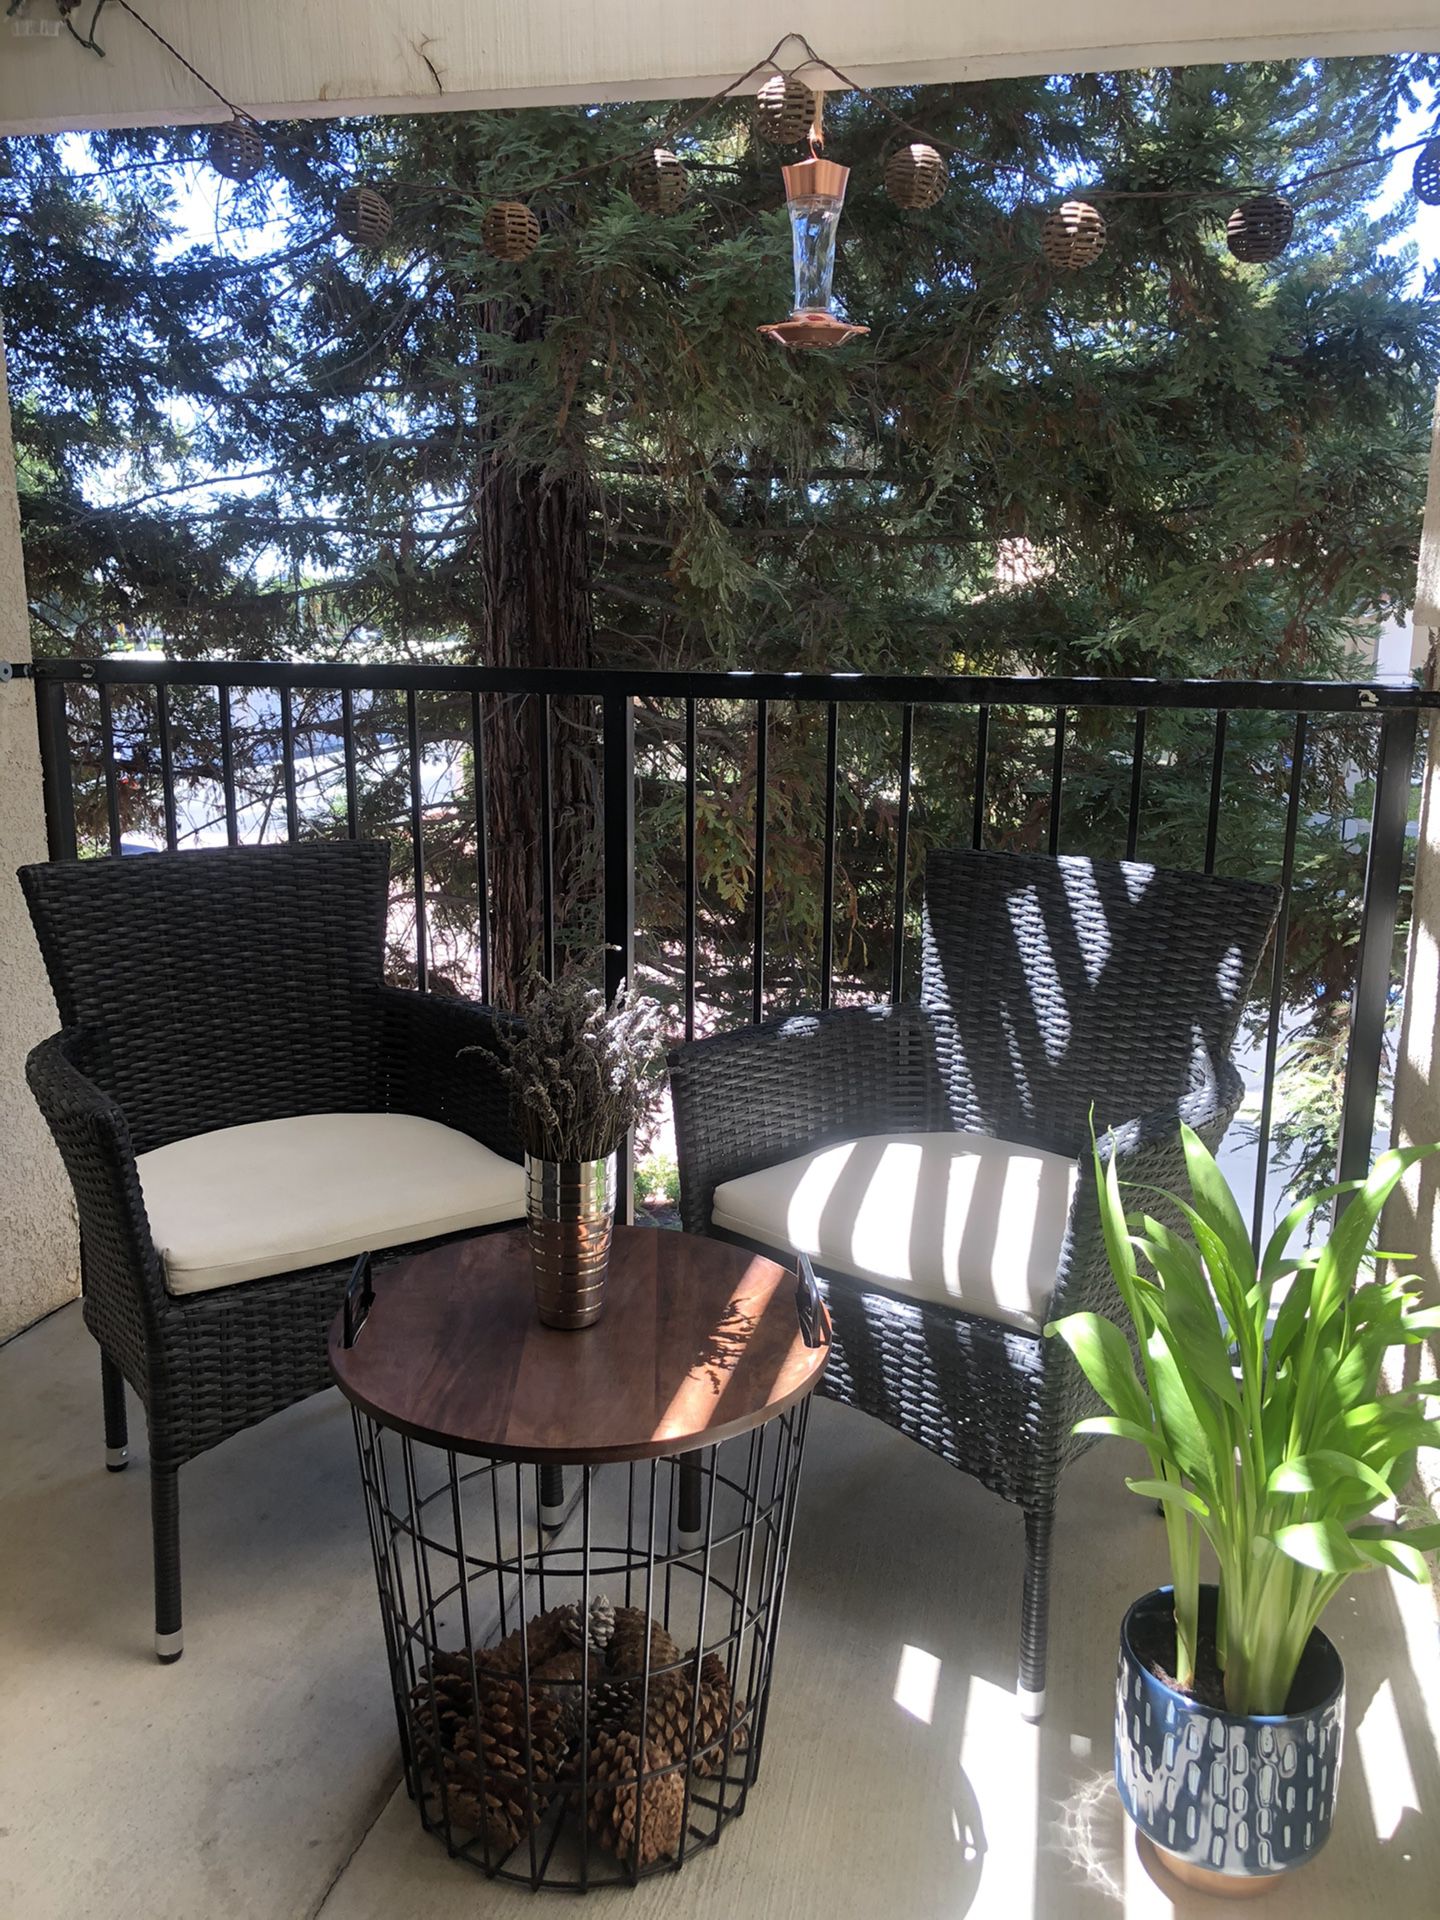 Set of 2 Patio Chairs with Modern wooden/iron Table.